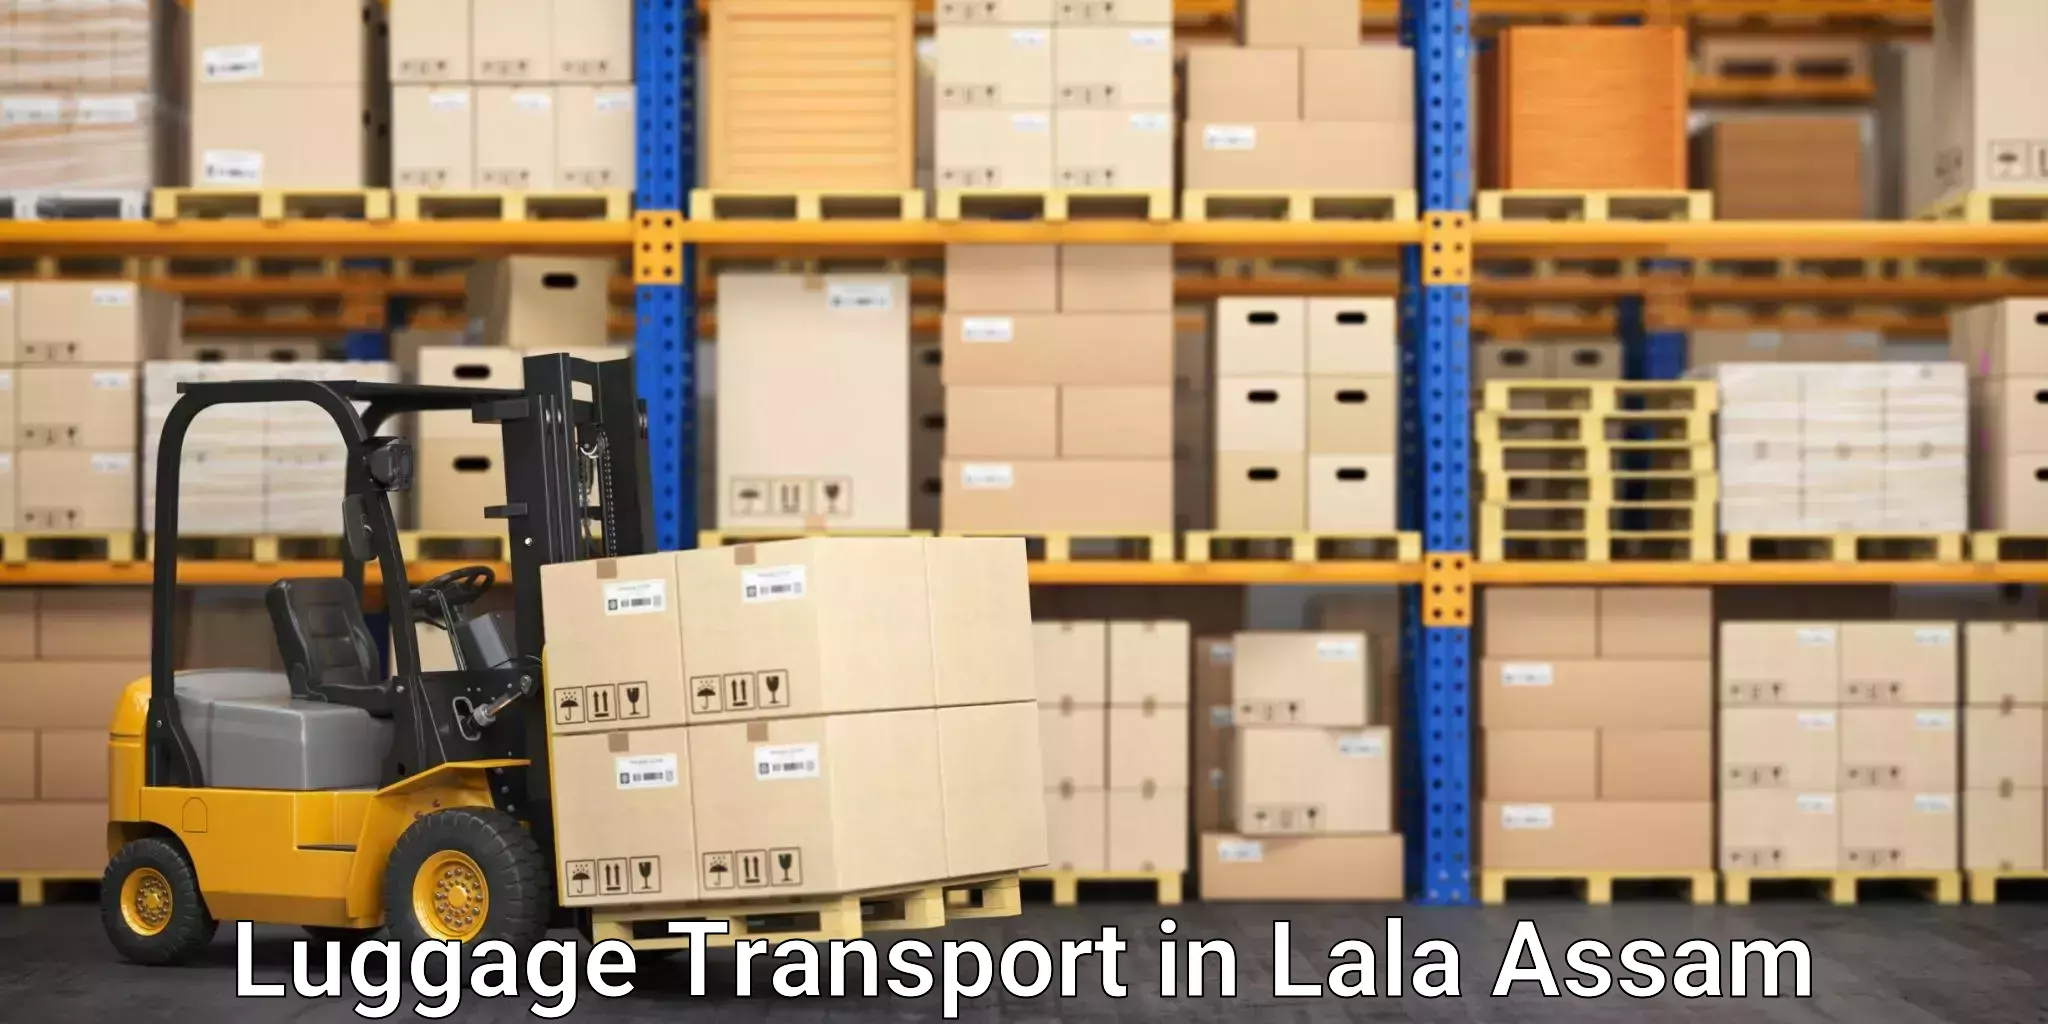 Luggage transport pricing in Lala Assam